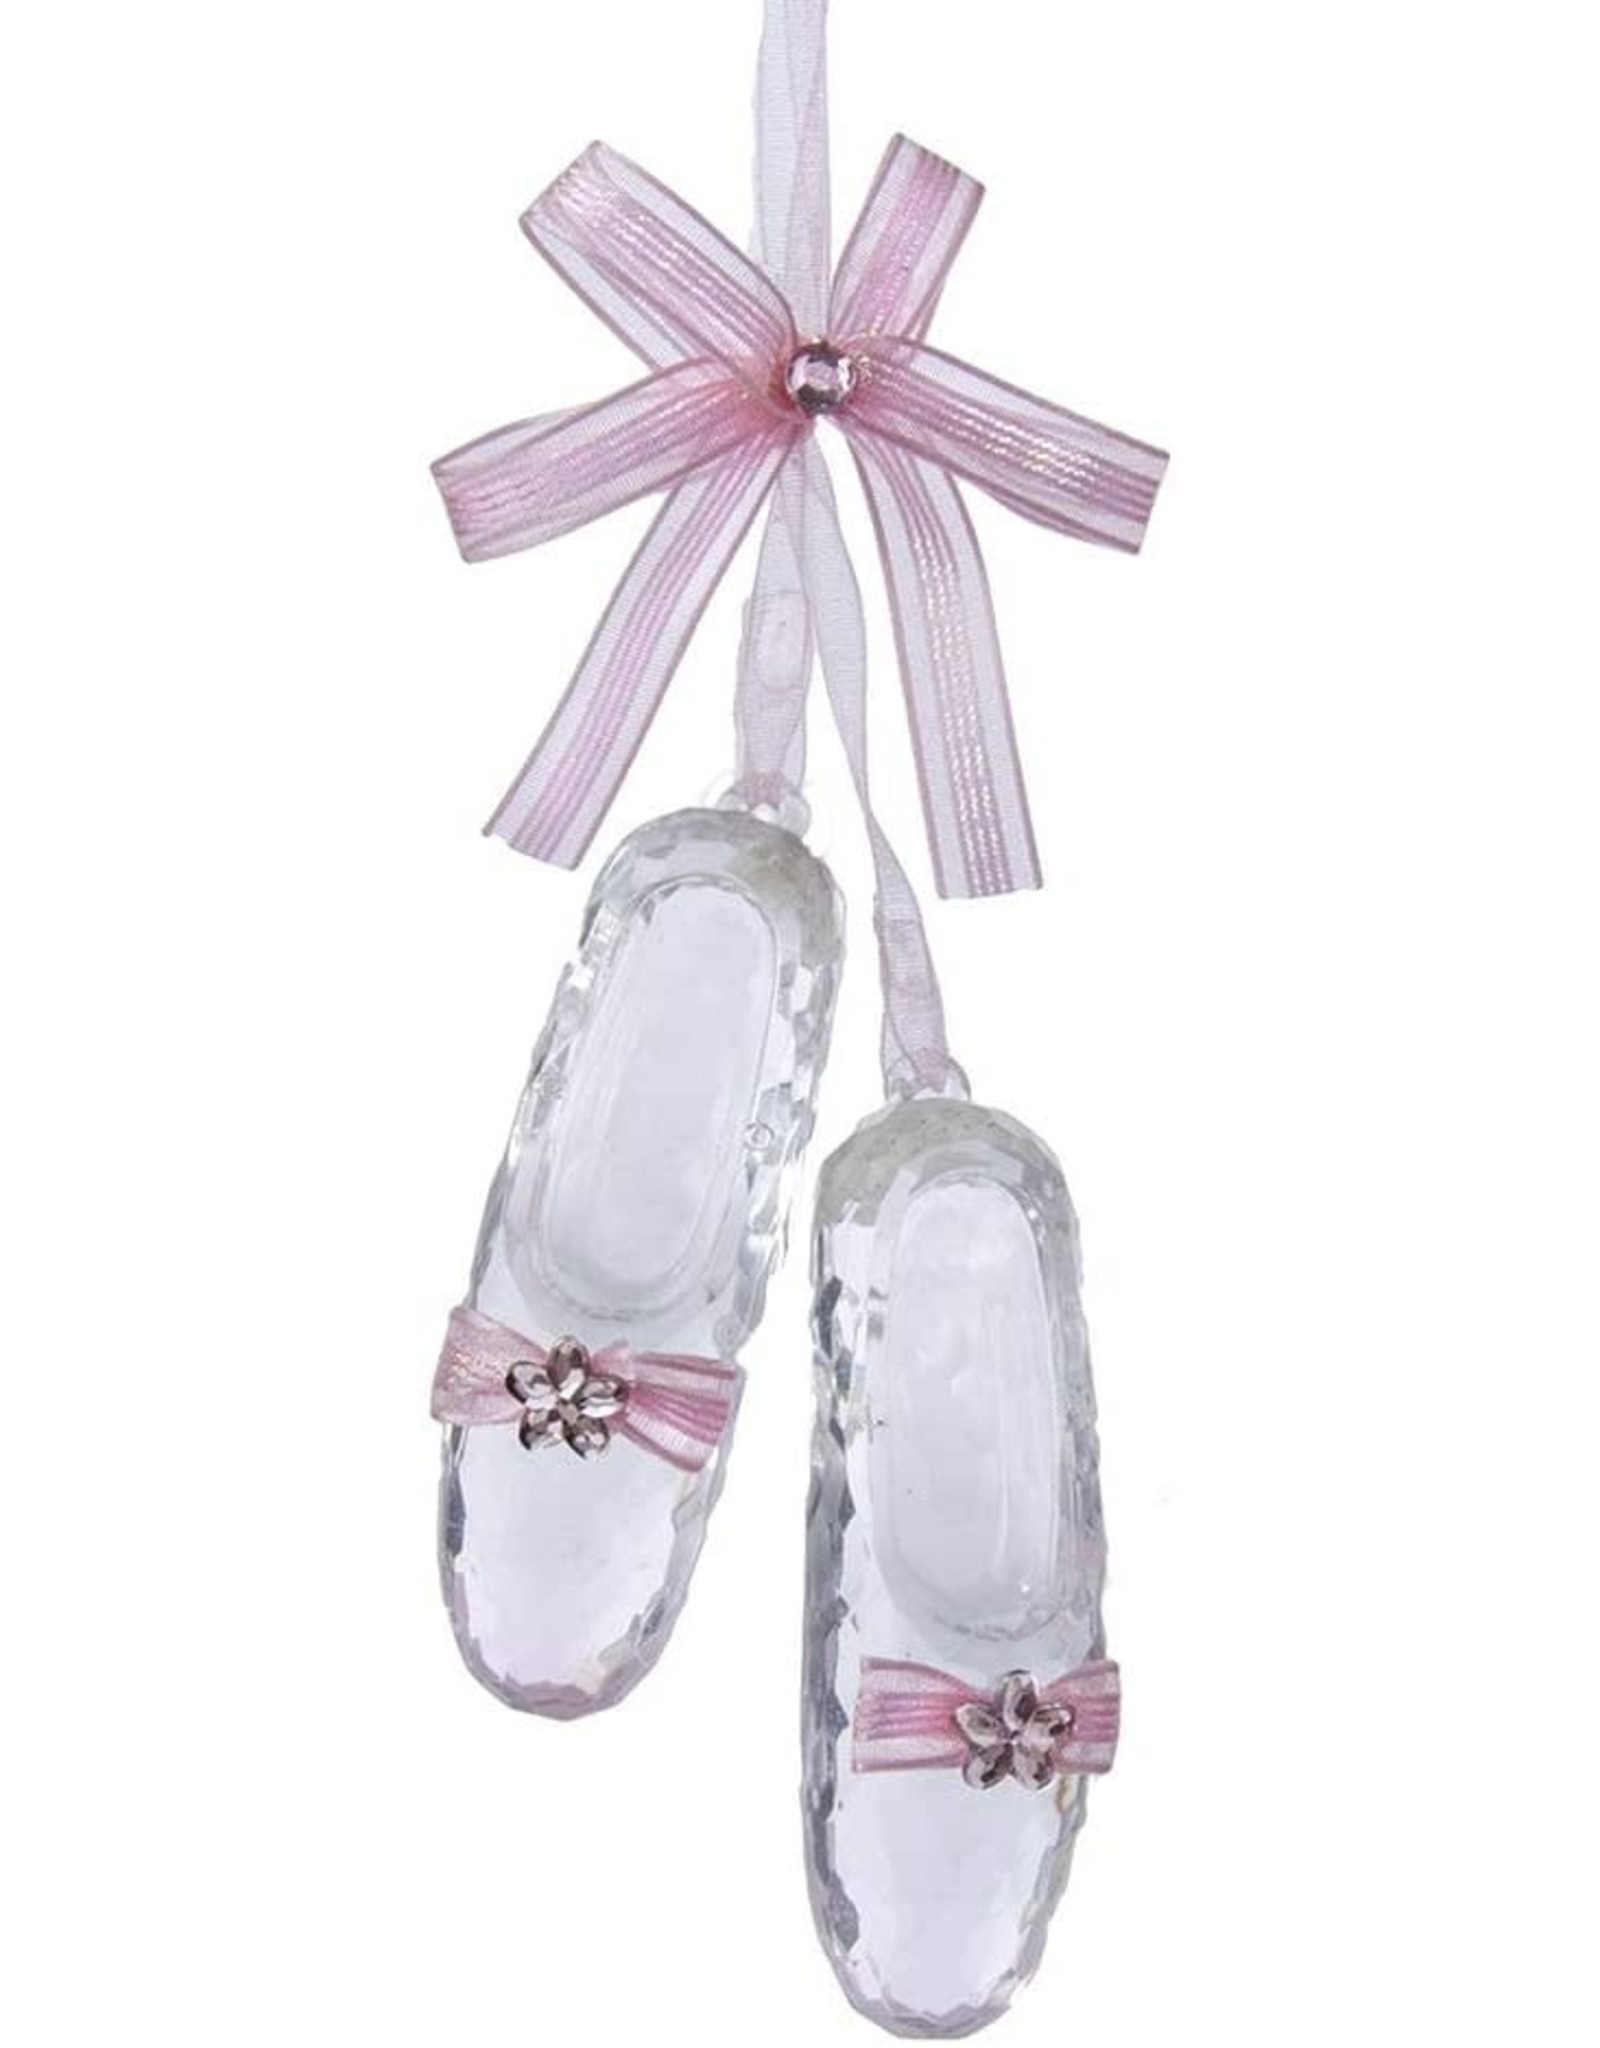 Kurt Adler Pink Ballet Shoes With Bow and Jewel Acrylic Ornament